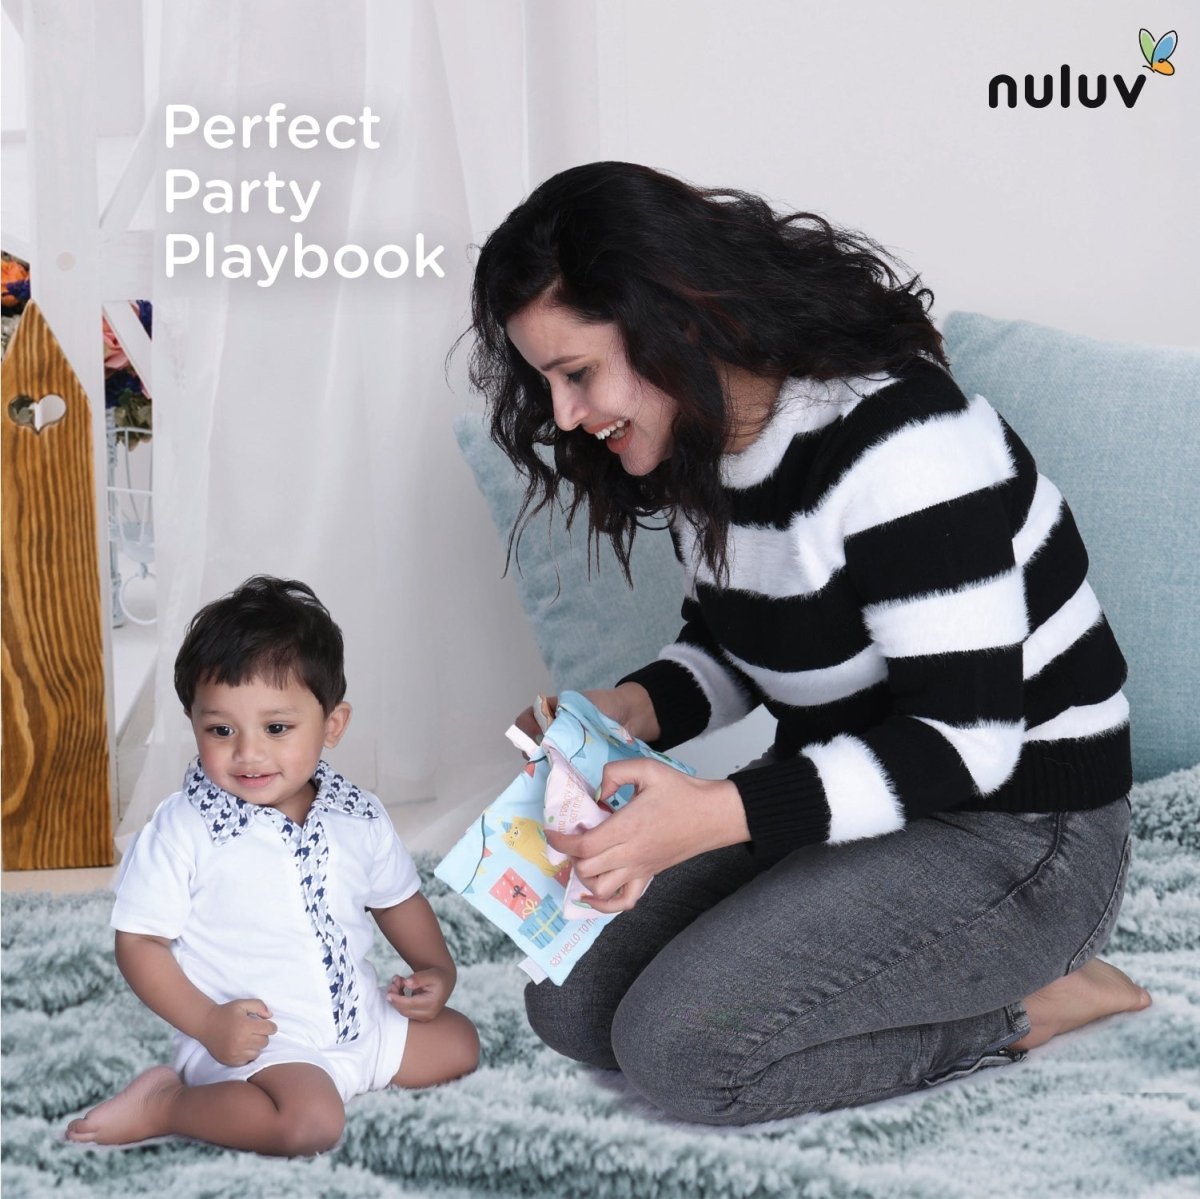 Nuluv Perfect Party Playbook - NU-I-0010